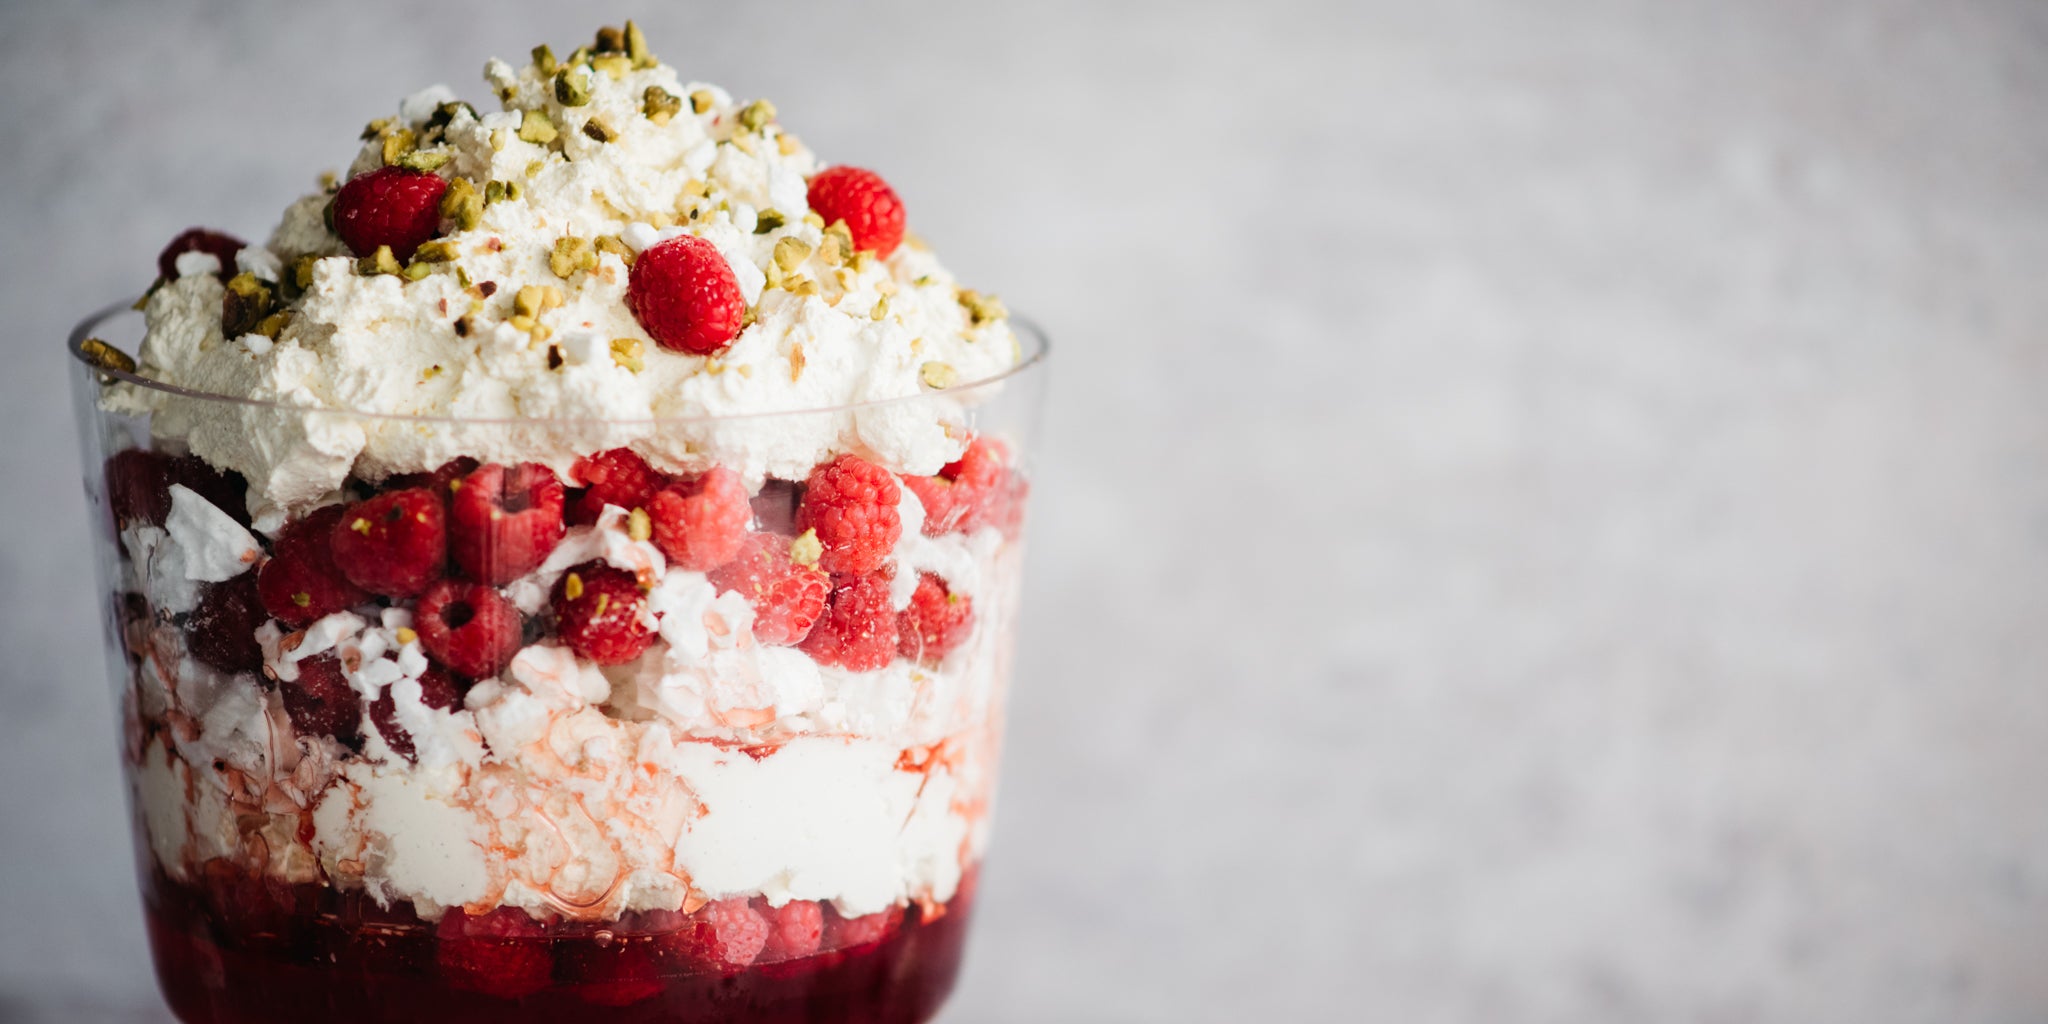 Close up of a fully layered Eton Mess Trifle sprinkled with a chopped nuts and fresh rasperries